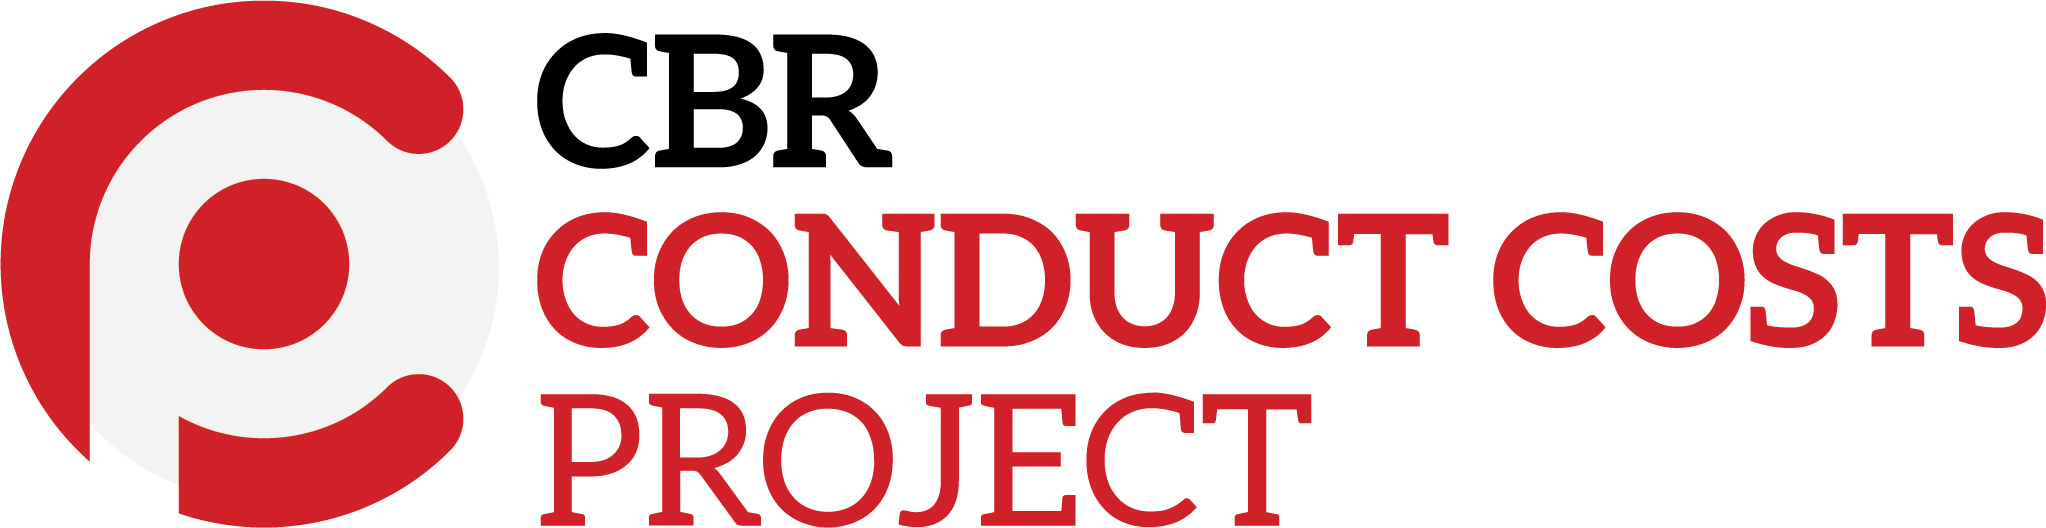 The cbr conduct costs project